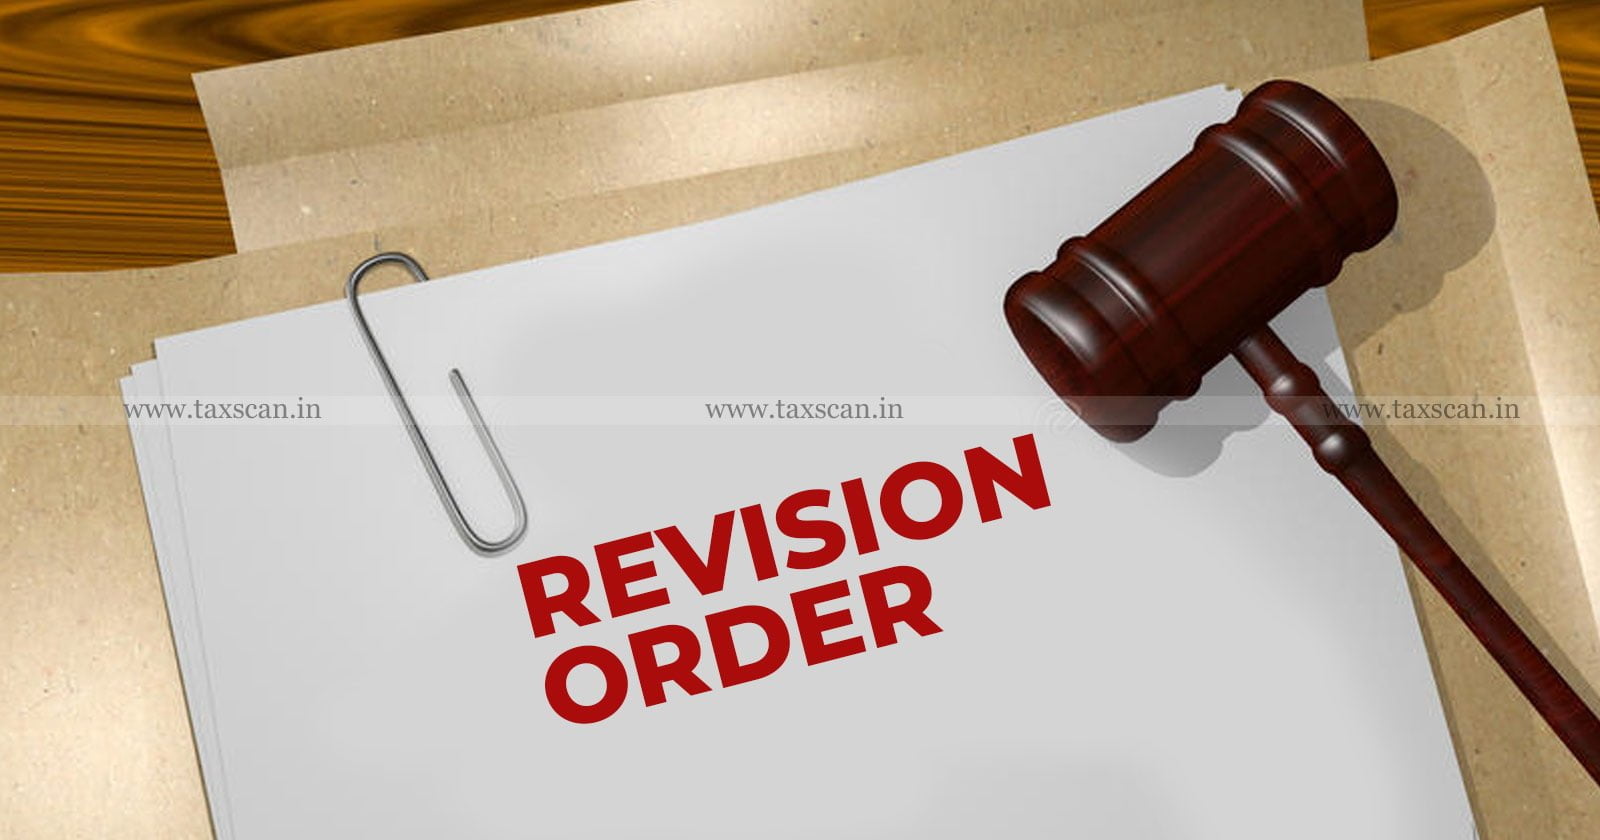 No Violation of Proviso to Provision - Income Tax Act - ITAT Aside Revision Order on Exemption - TAXSCAN